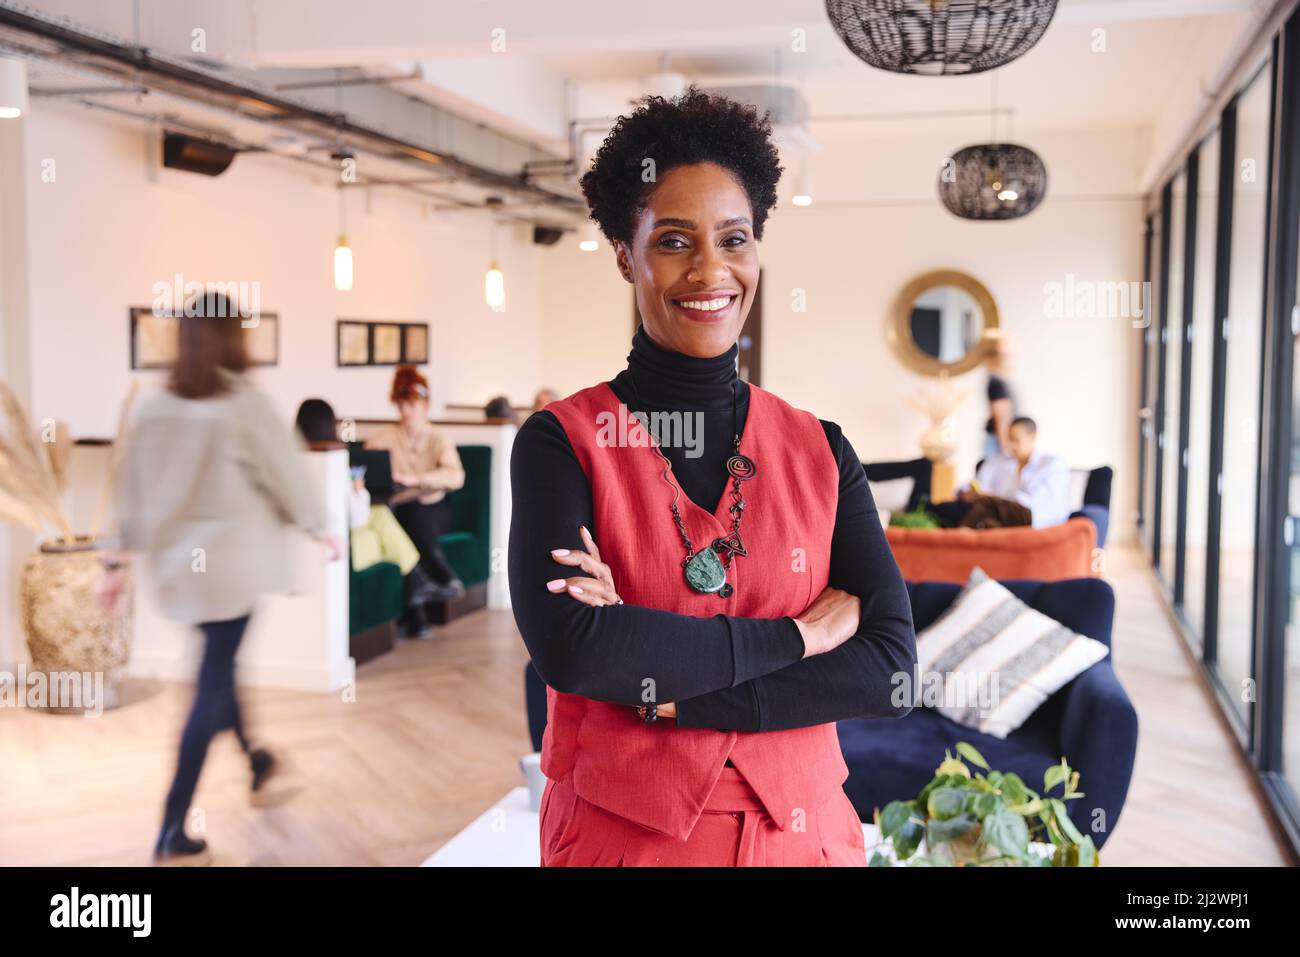 Portrait of confident mature black businesswoman with short black hair smiling and looking at camera with arms folded in coworking space Stock Photo